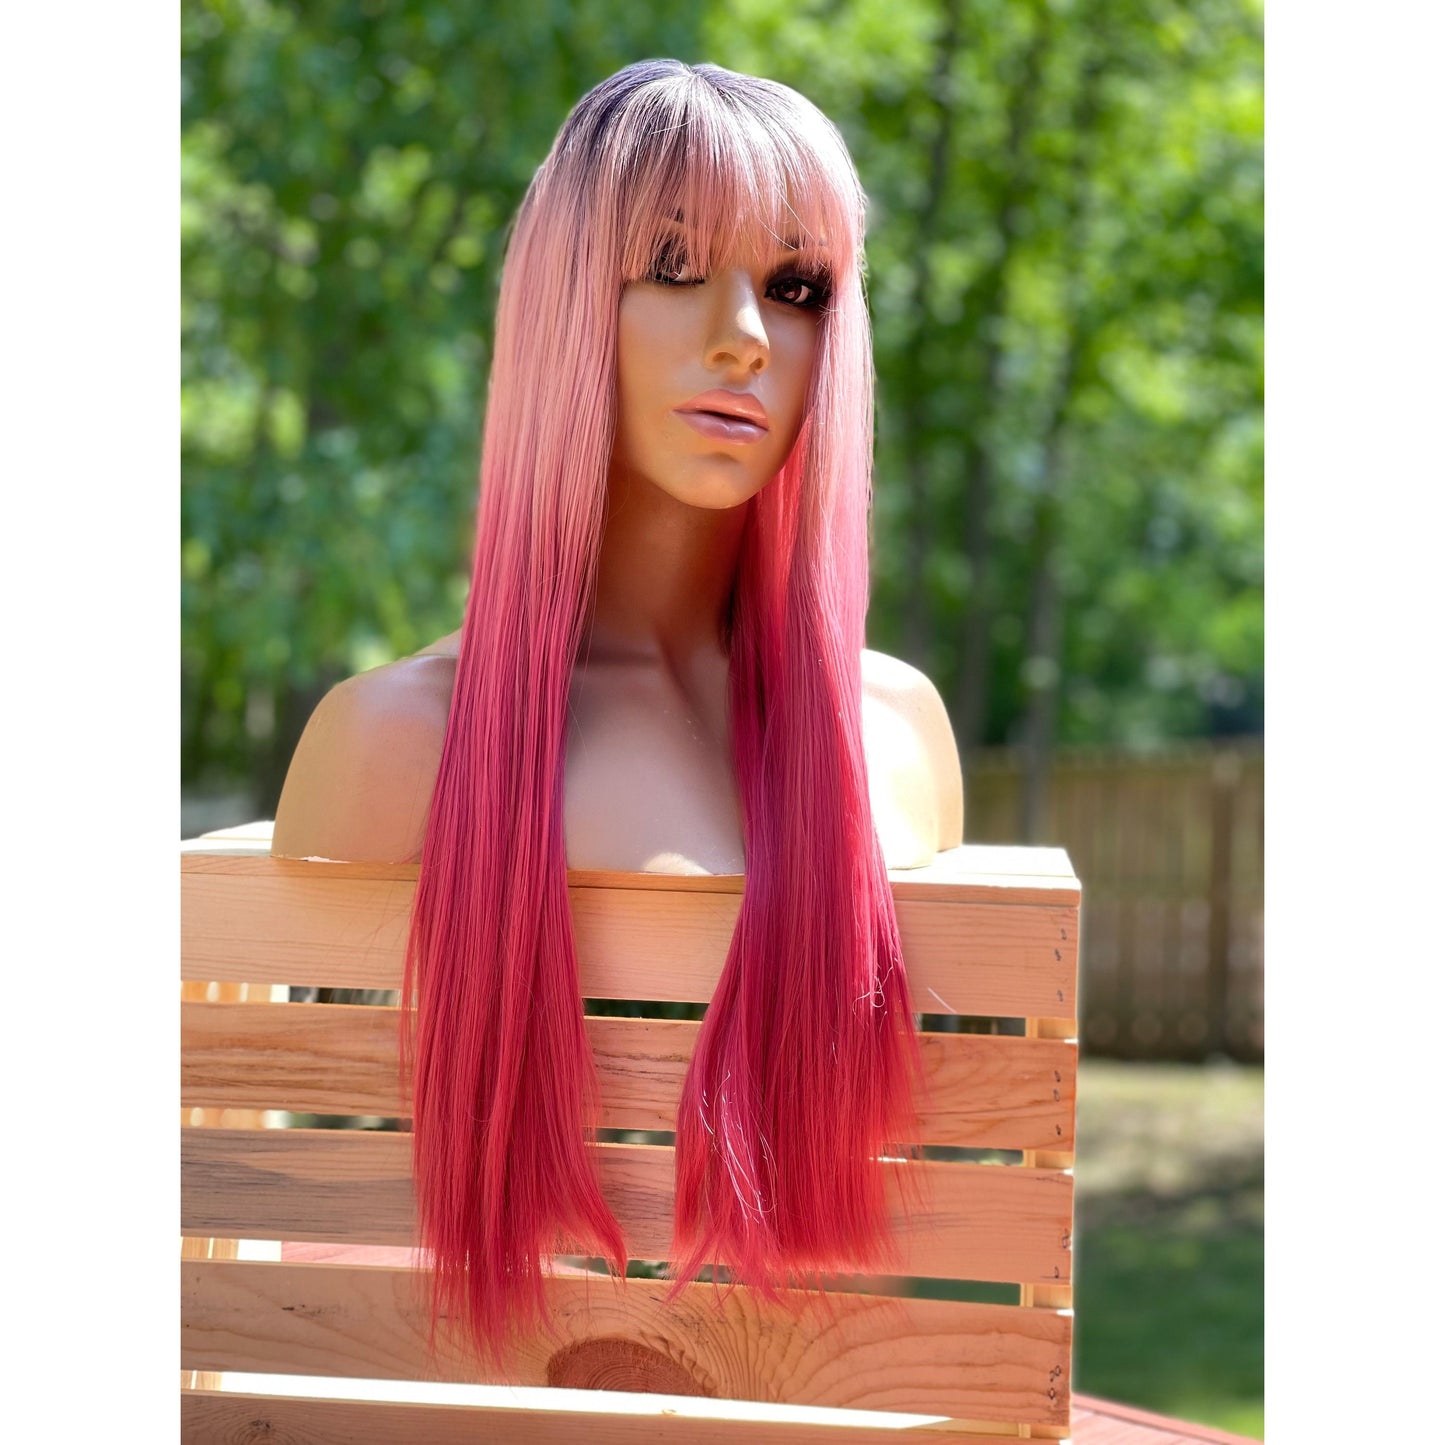 24” pink ombre dark root balayage full cap long straight human hair blend wig